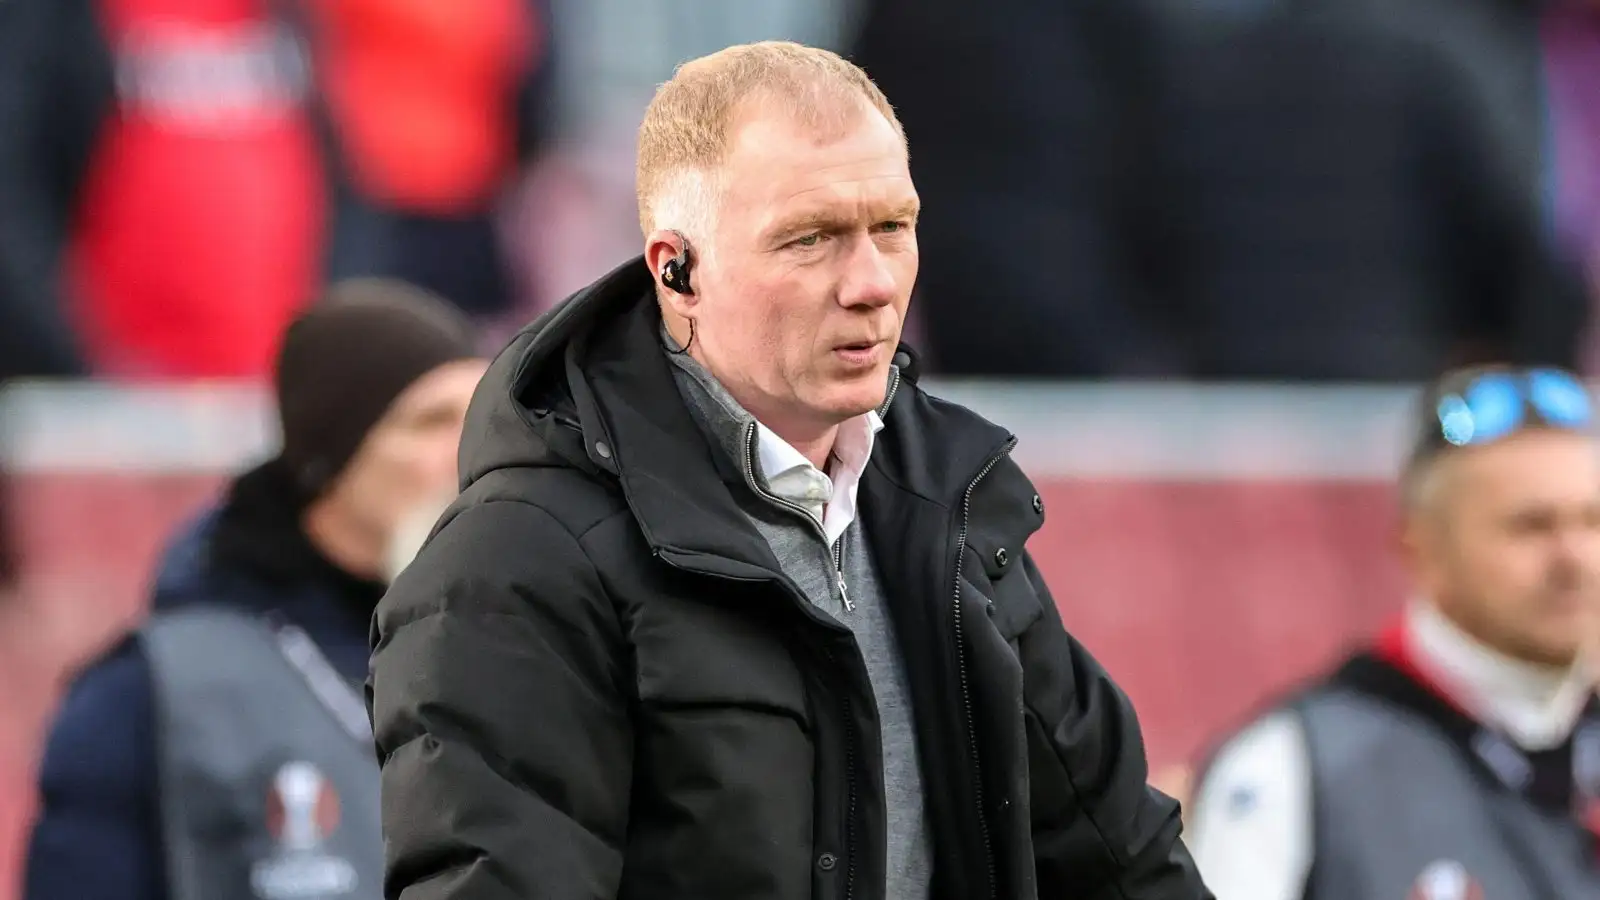 ‘Worried’ Scholes blasts ‘lazy’ and ‘weak’ Man Utd pair after embarrassing Galatasaray defeat